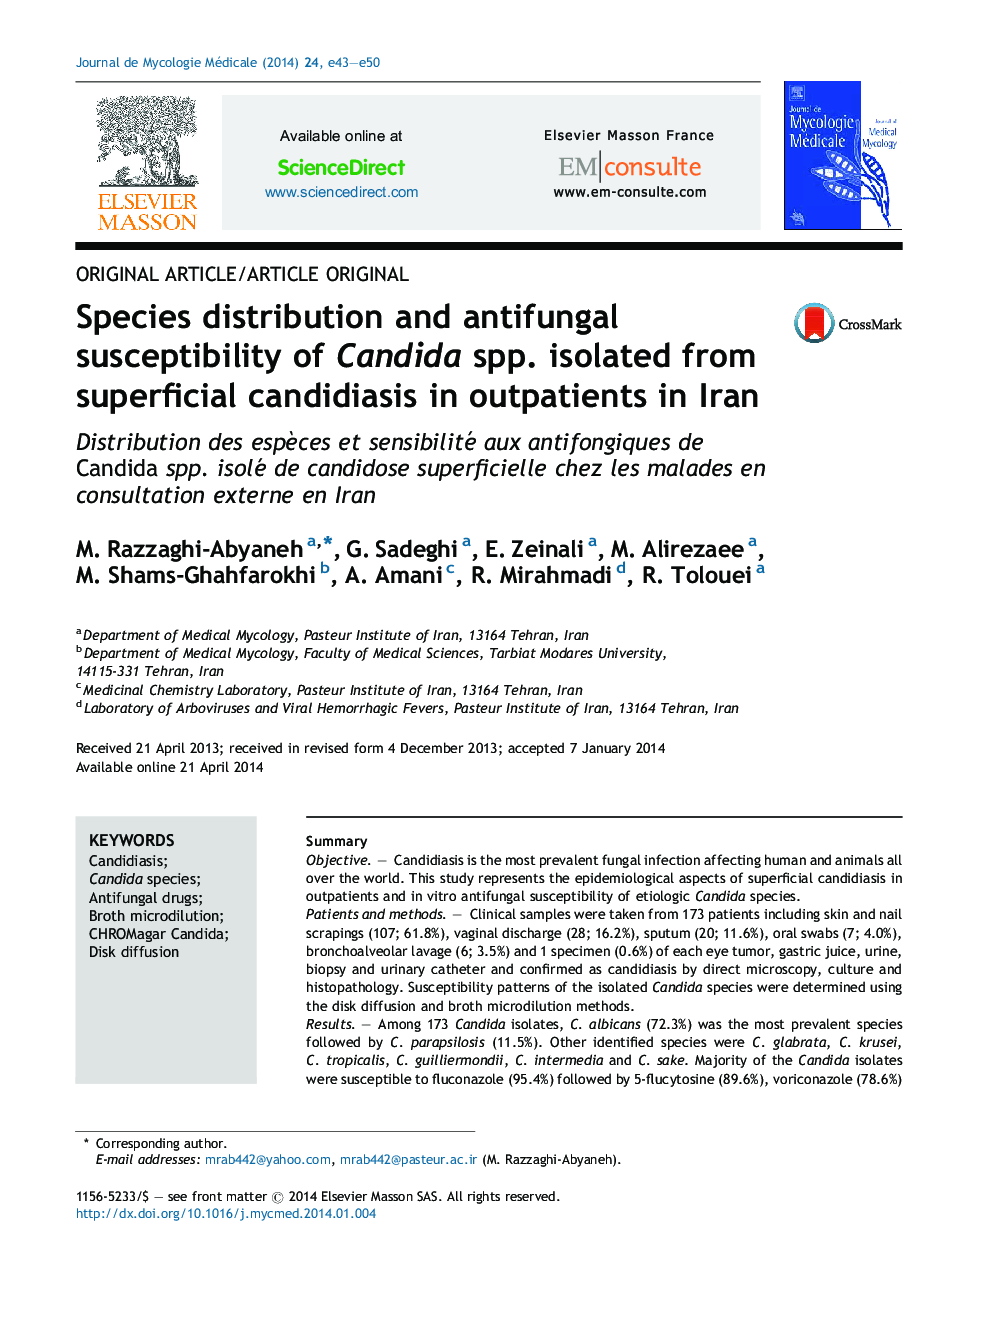 Species distribution and antifungal susceptibility of Candida spp. isolated from superficial candidiasis in outpatients in Iran